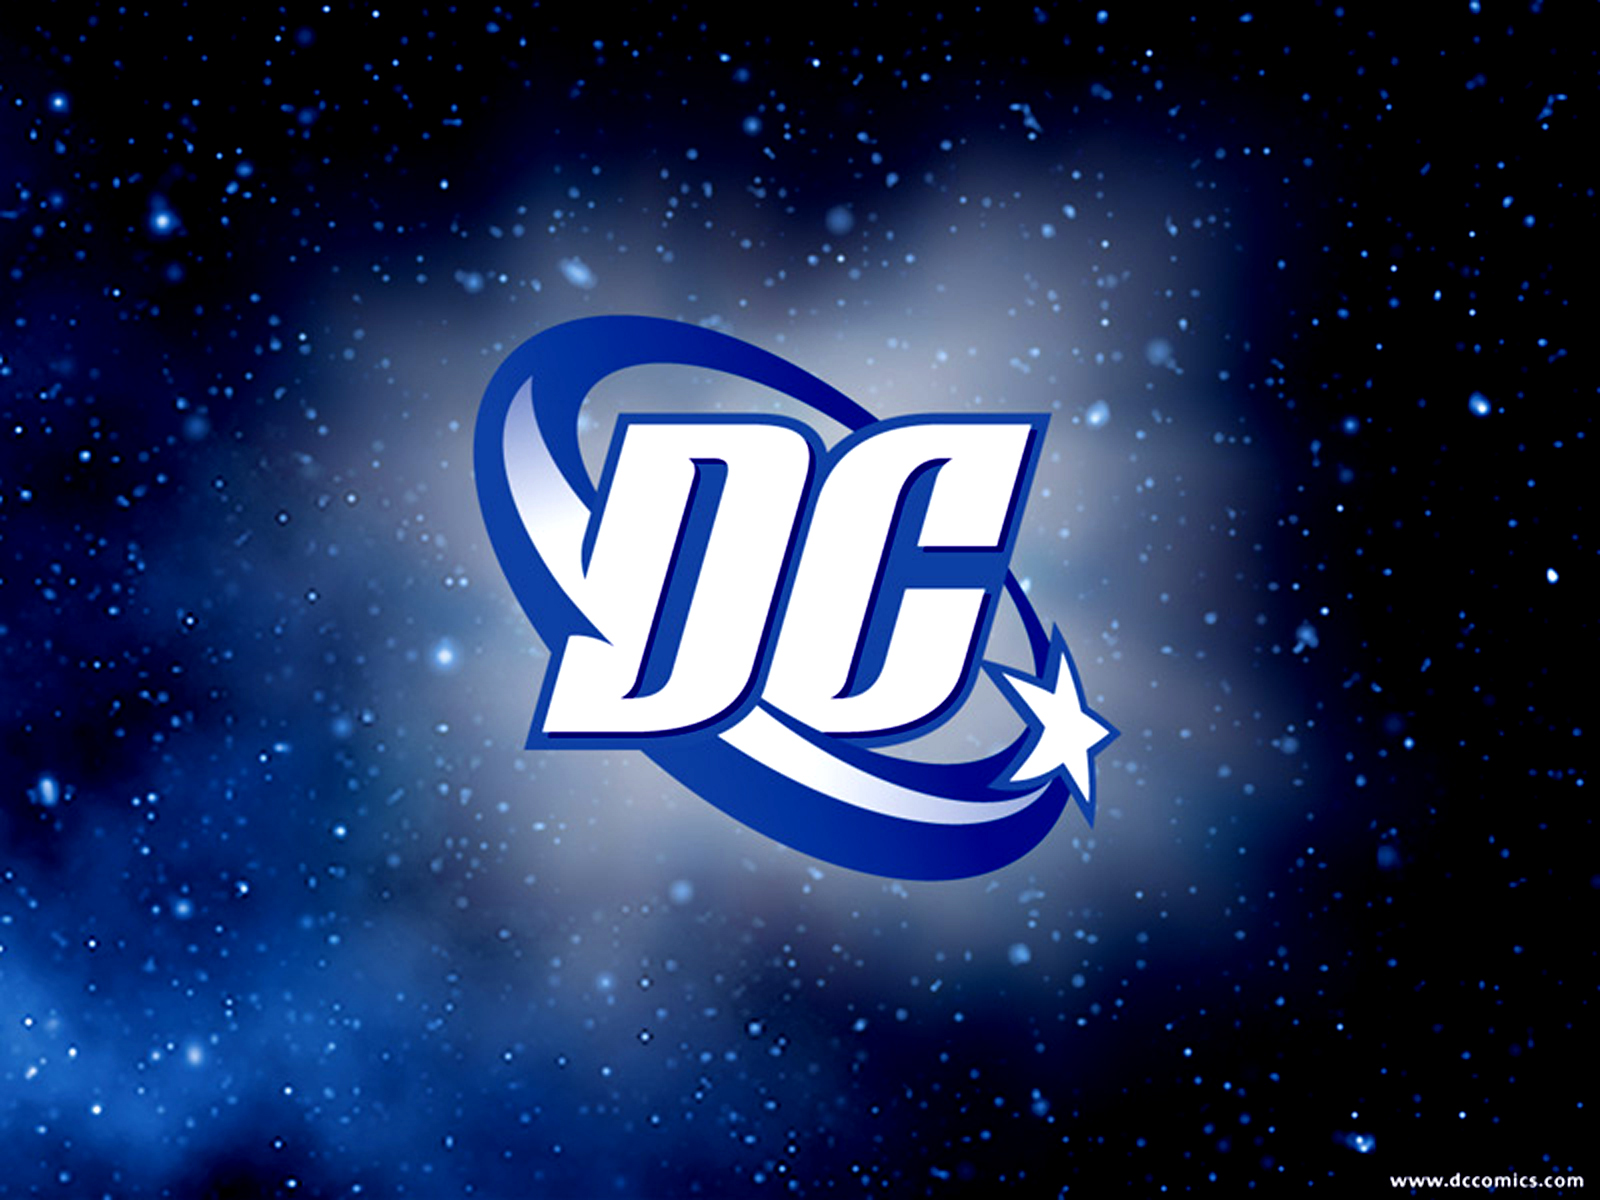 download dc++ for windows 10